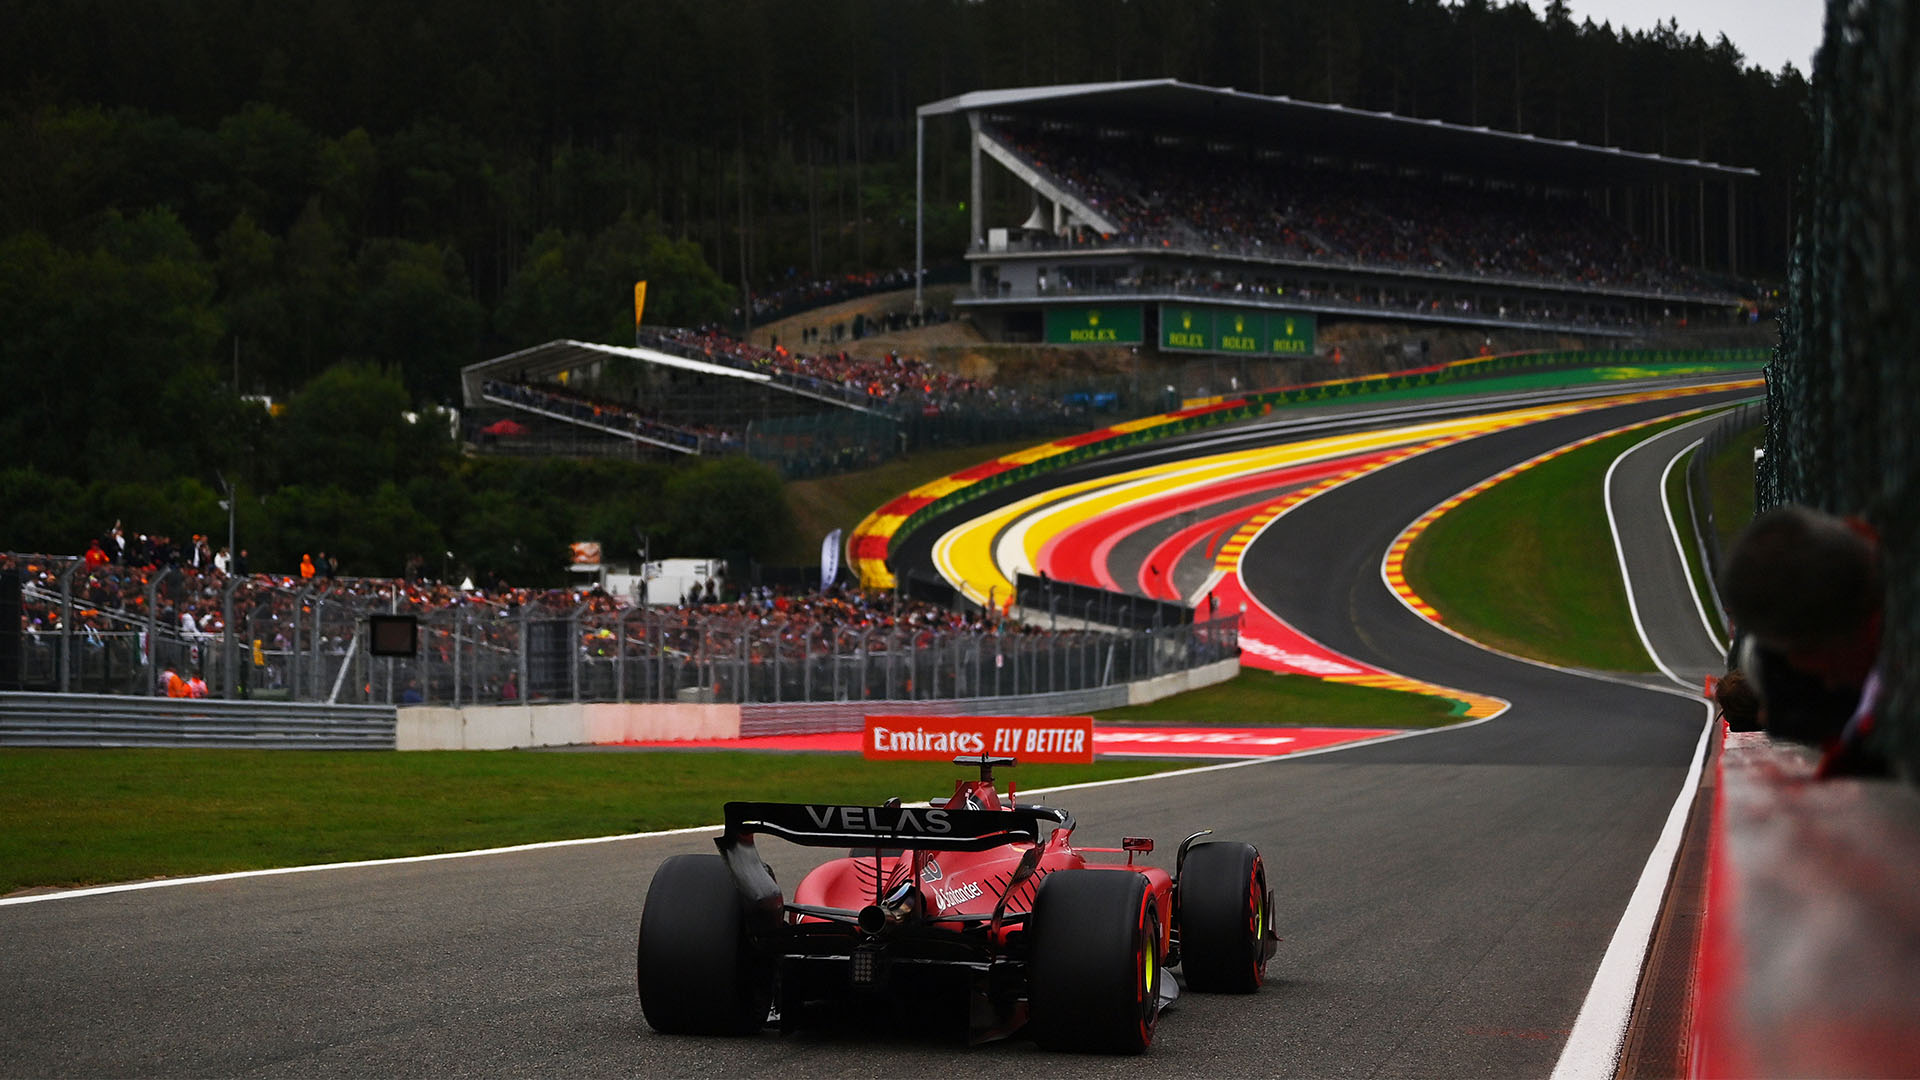 Spa to form part of 2023 F1 calendar following agreement to extend partnership. Formula 1®